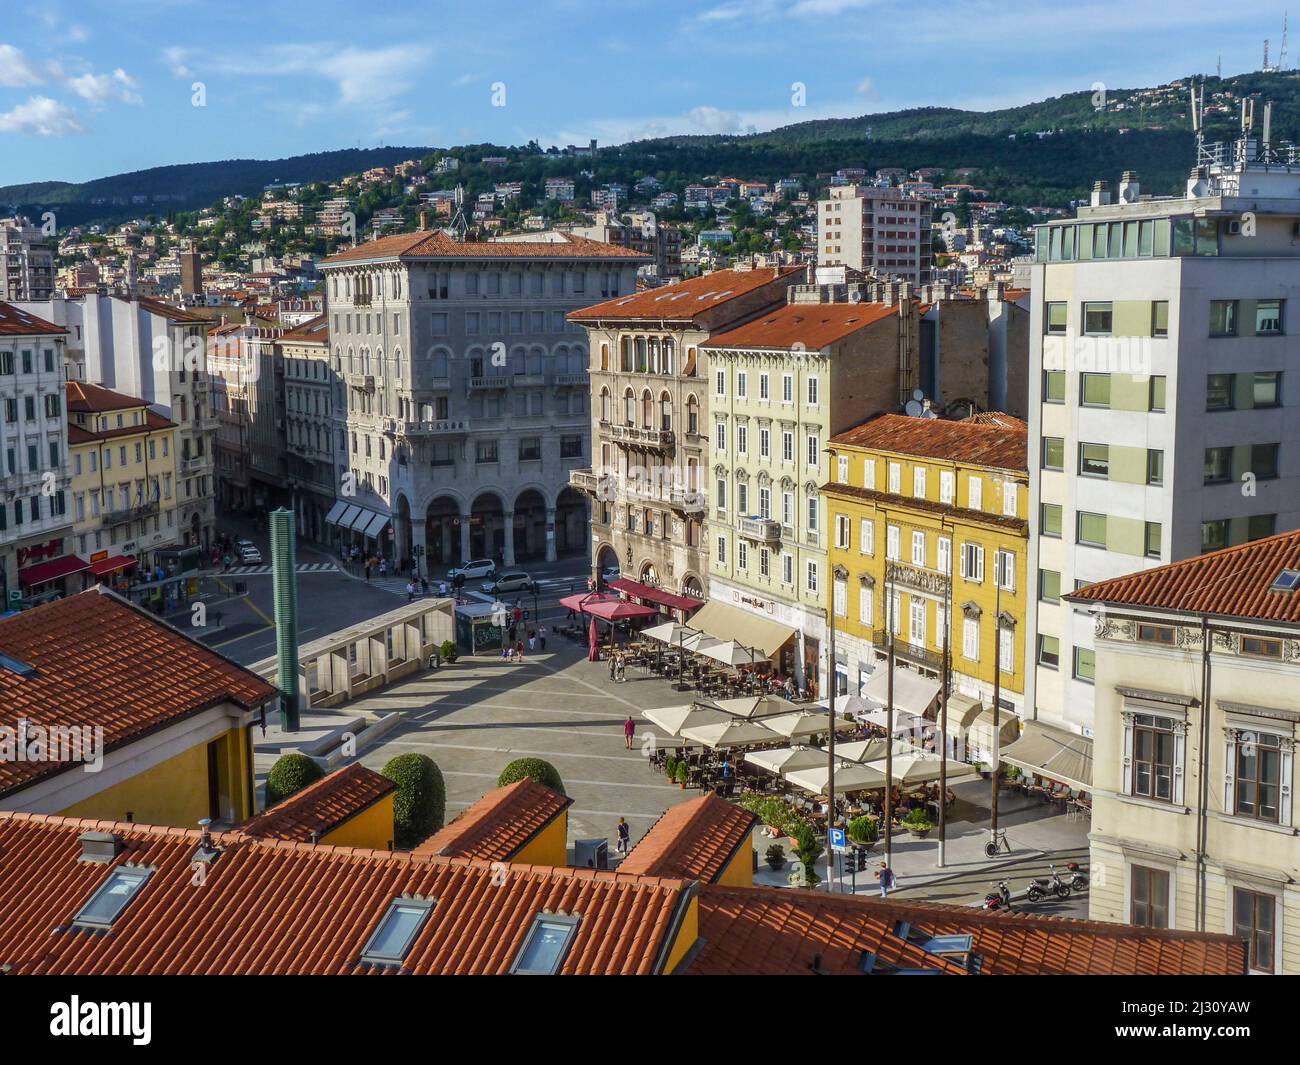 TRIESTE, ITALY - AUG 12, 2017: view to famous central market in Trieste, Italy. Trieste is a major tourist stopp point for people traveling to croatia Stock Photo